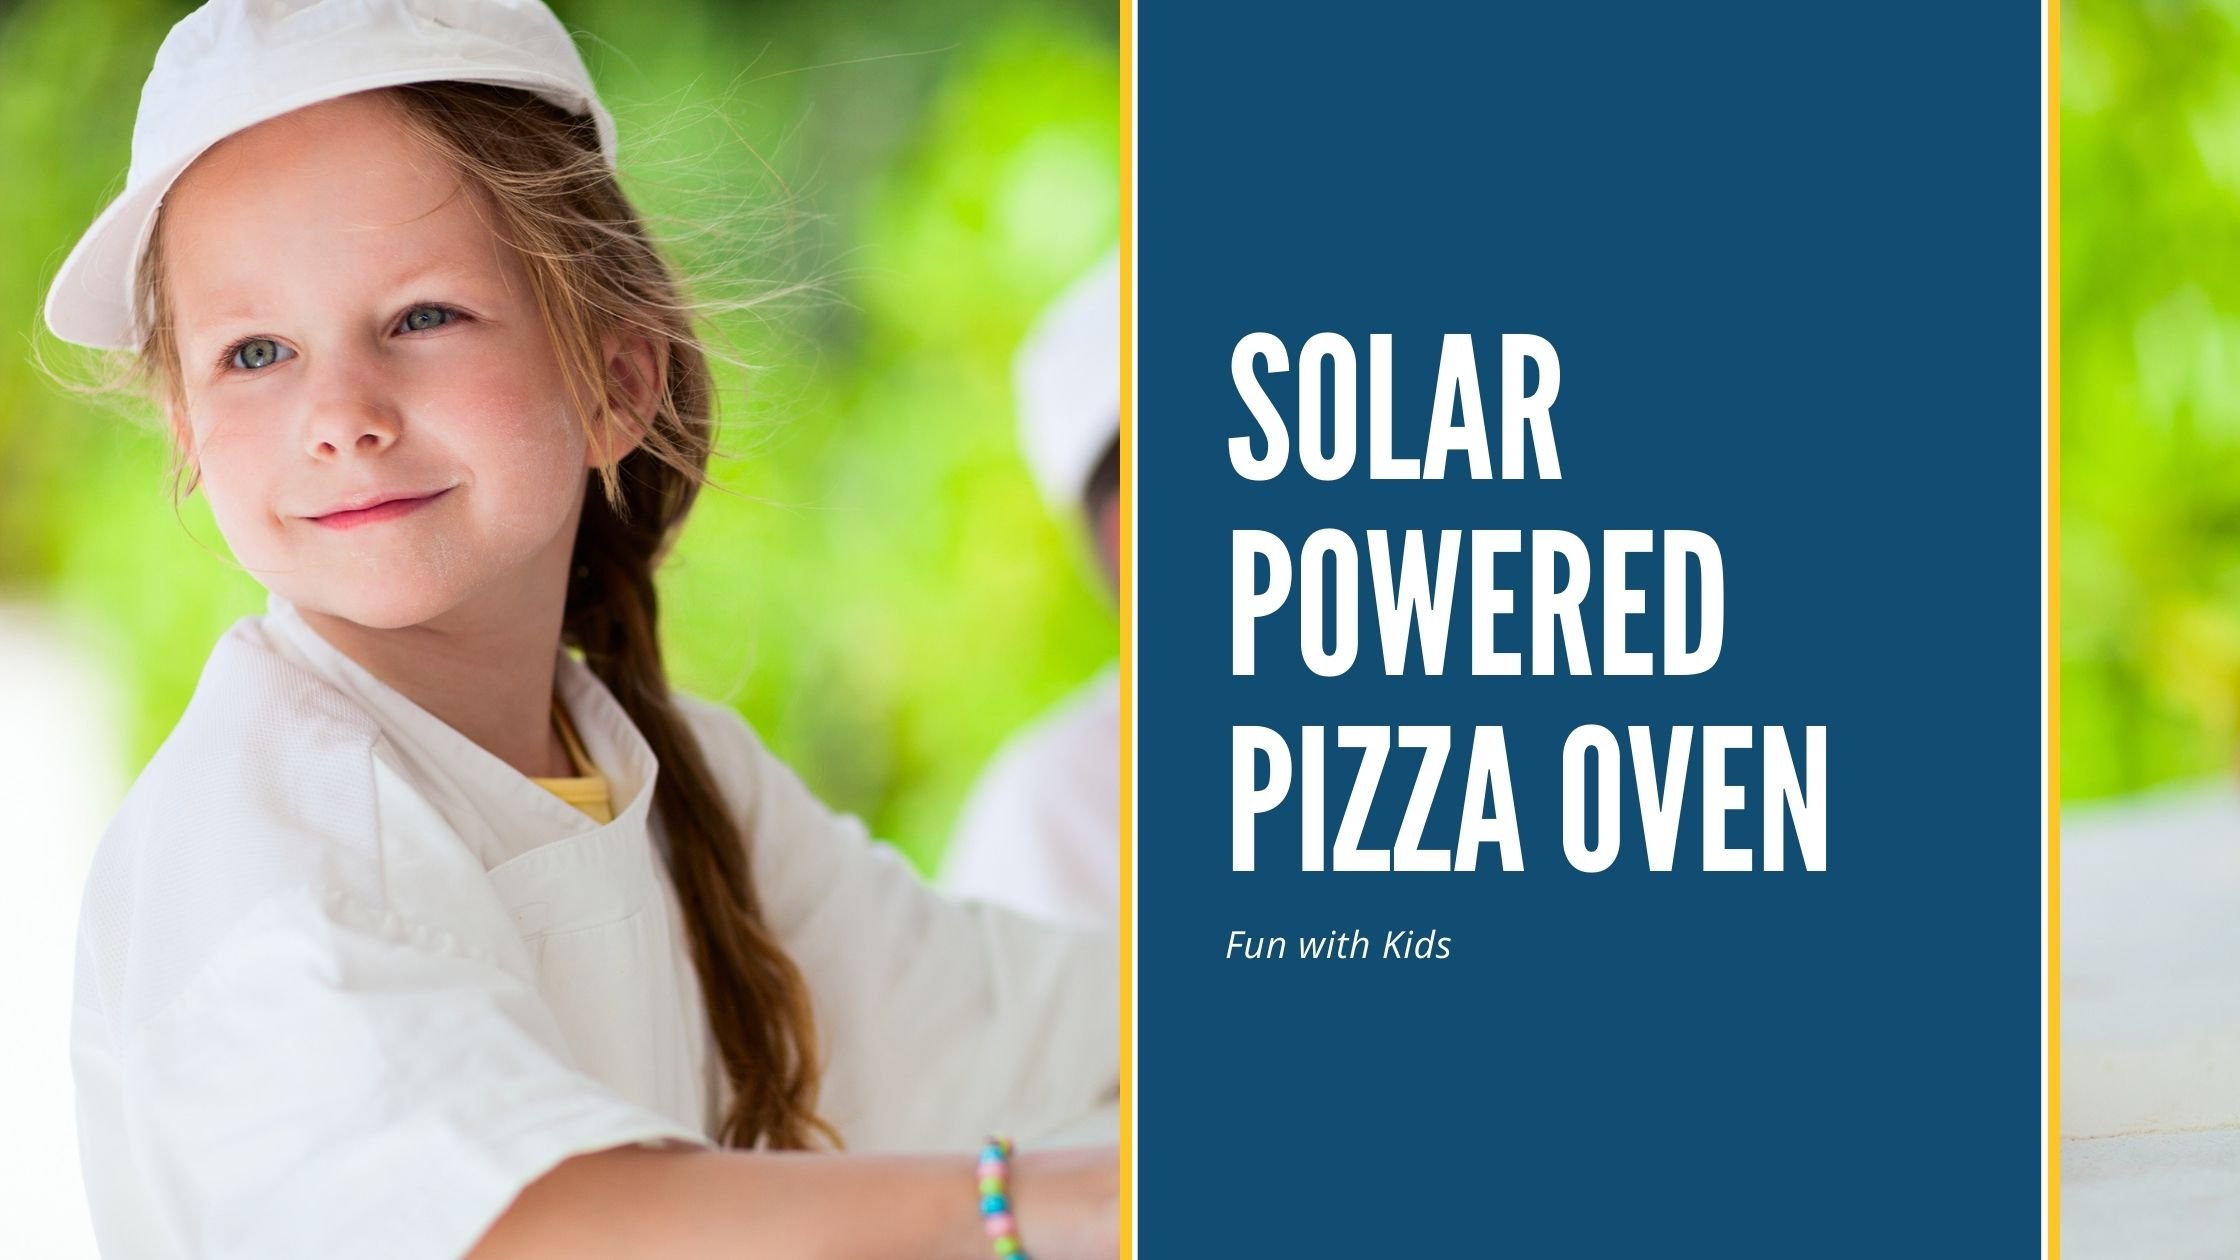 Solar Powered Pizza Oven for Fun with Kids